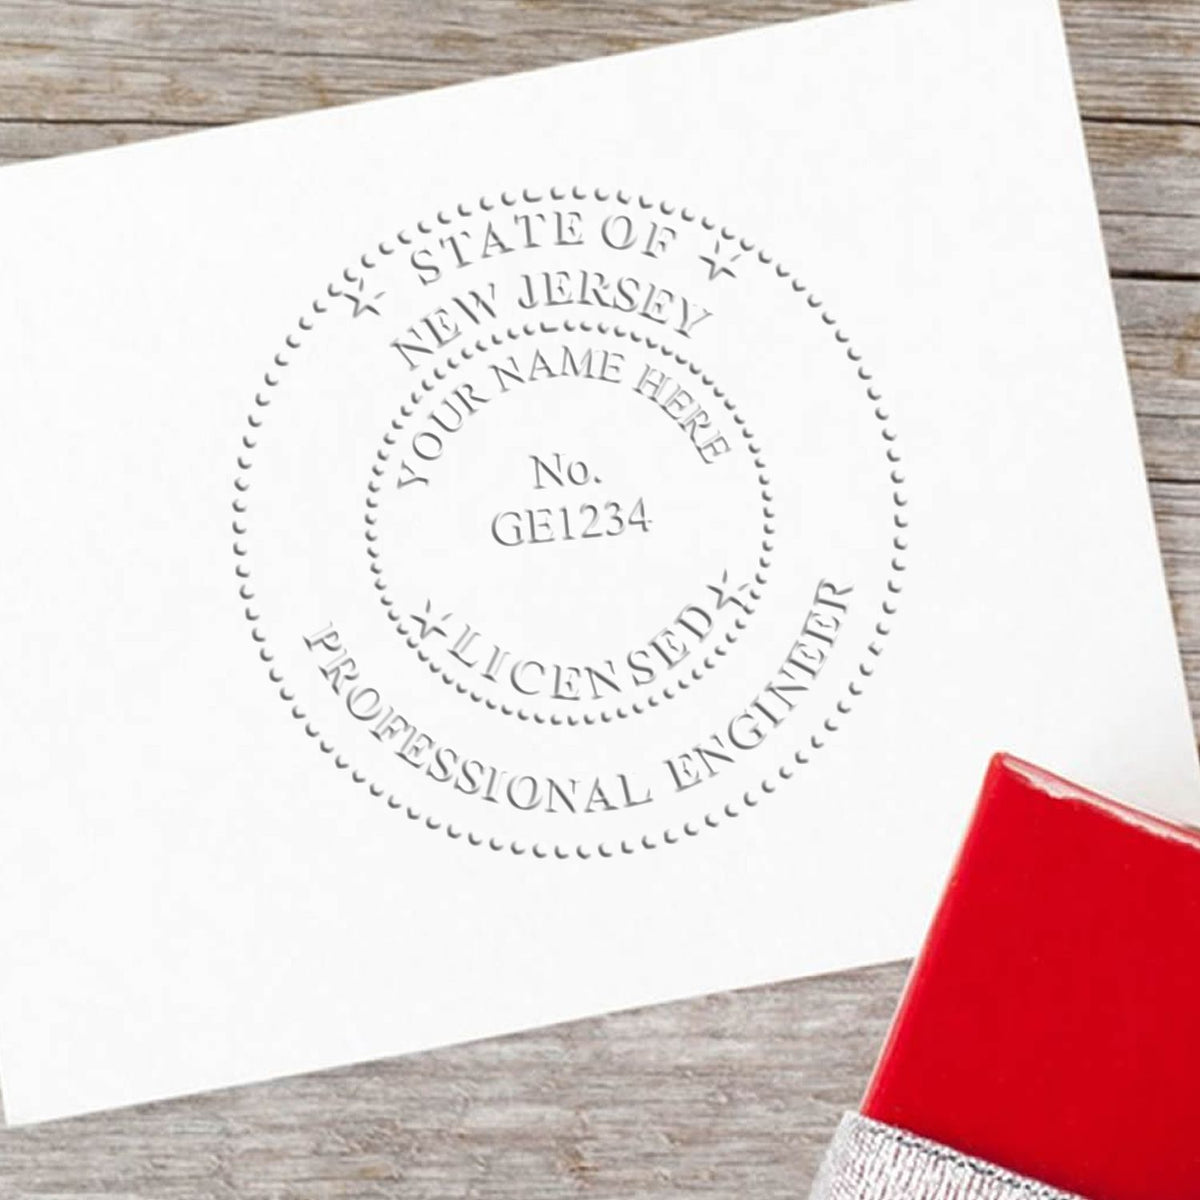 A stamped impression of the Soft New Jersey Professional Engineer Seal in this stylish lifestyle photo, setting the tone for a unique and personalized product.